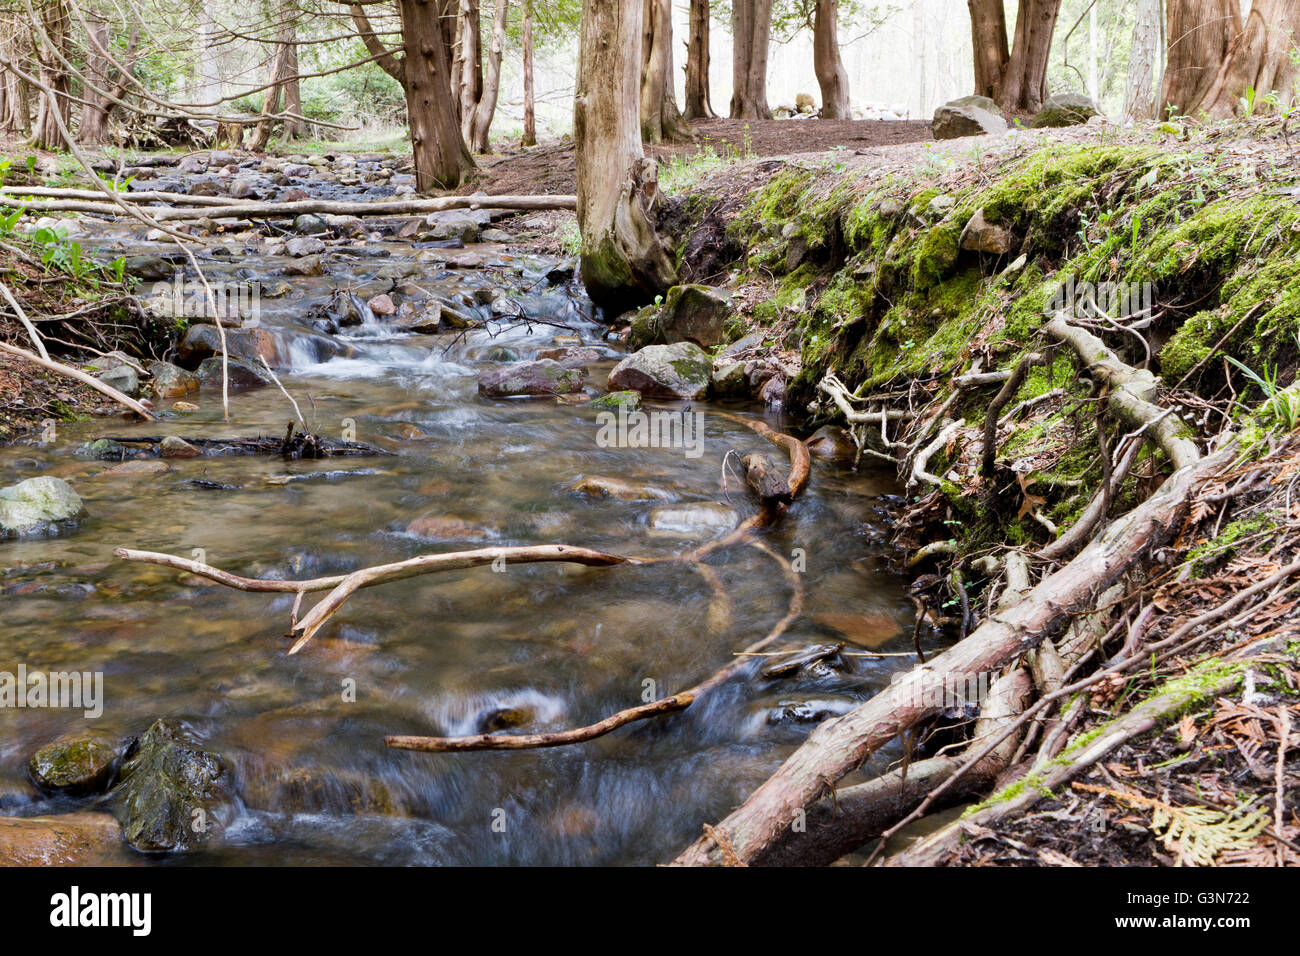 Water rushes over the rocks in a stream surrounded by pine trees Stock Photo